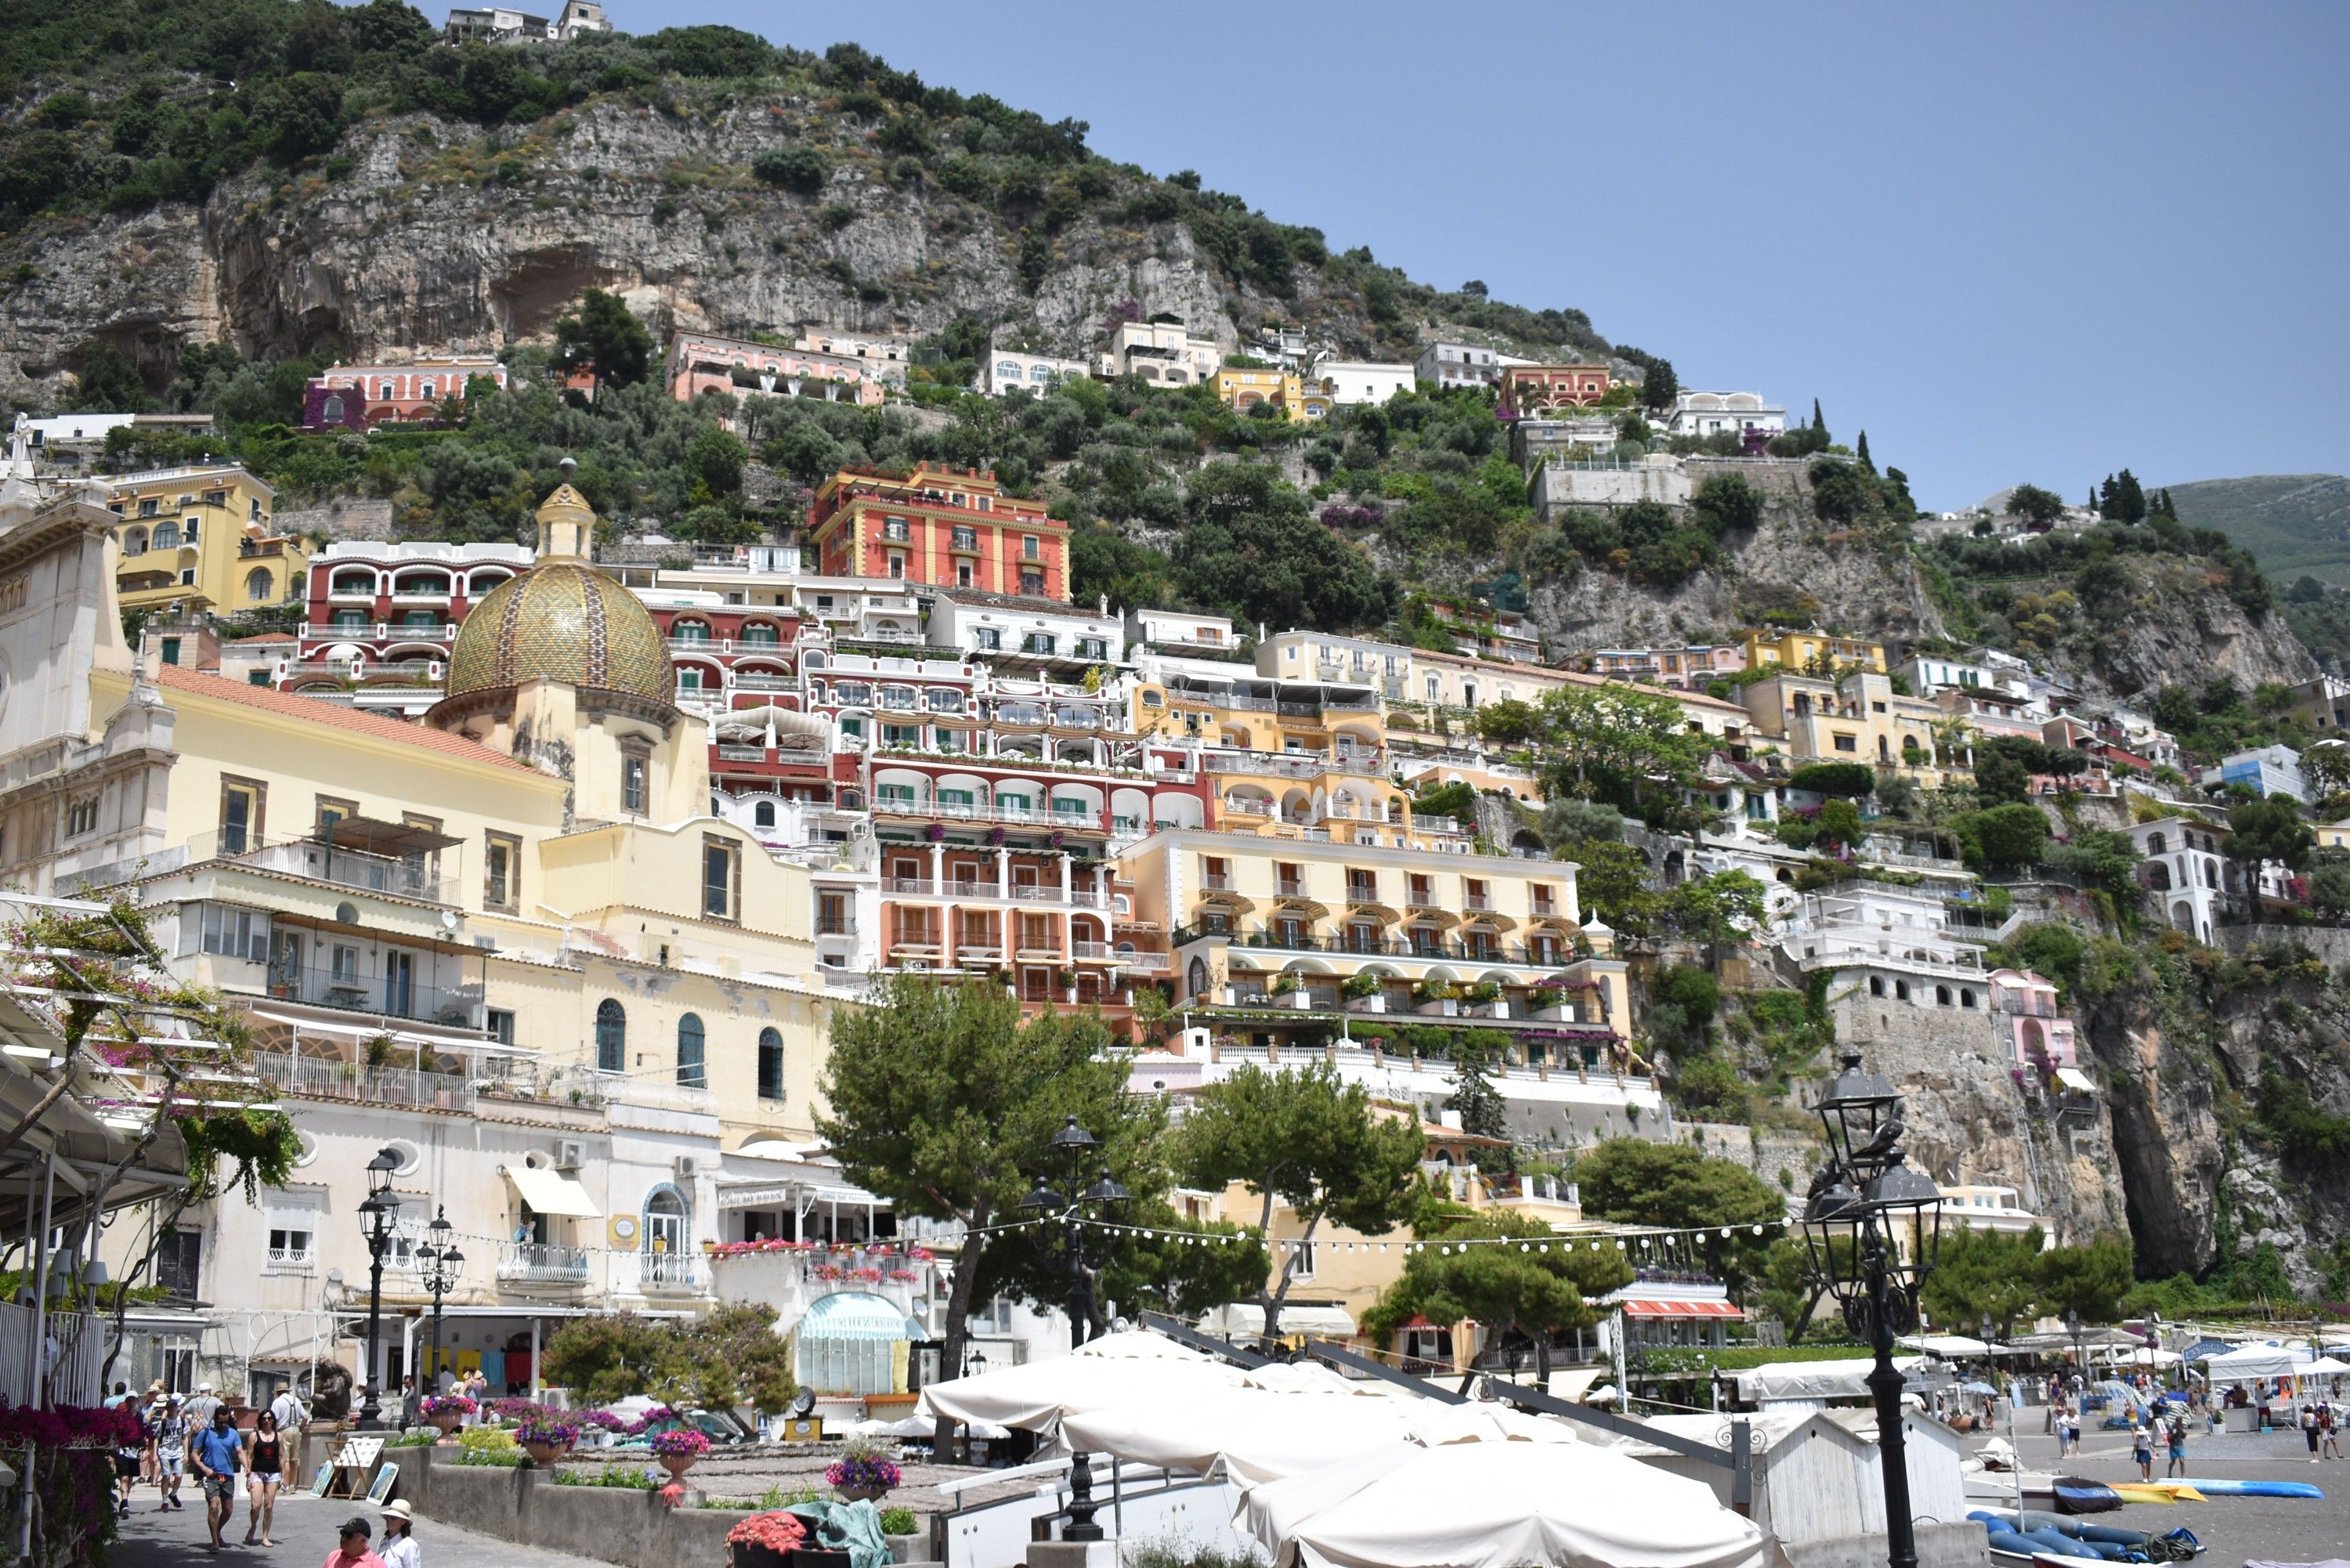 Caption: A photo of the colorful, terraced houses close to the beach in Positano and the rocky hills above them. (Local Guide @MoniDi)